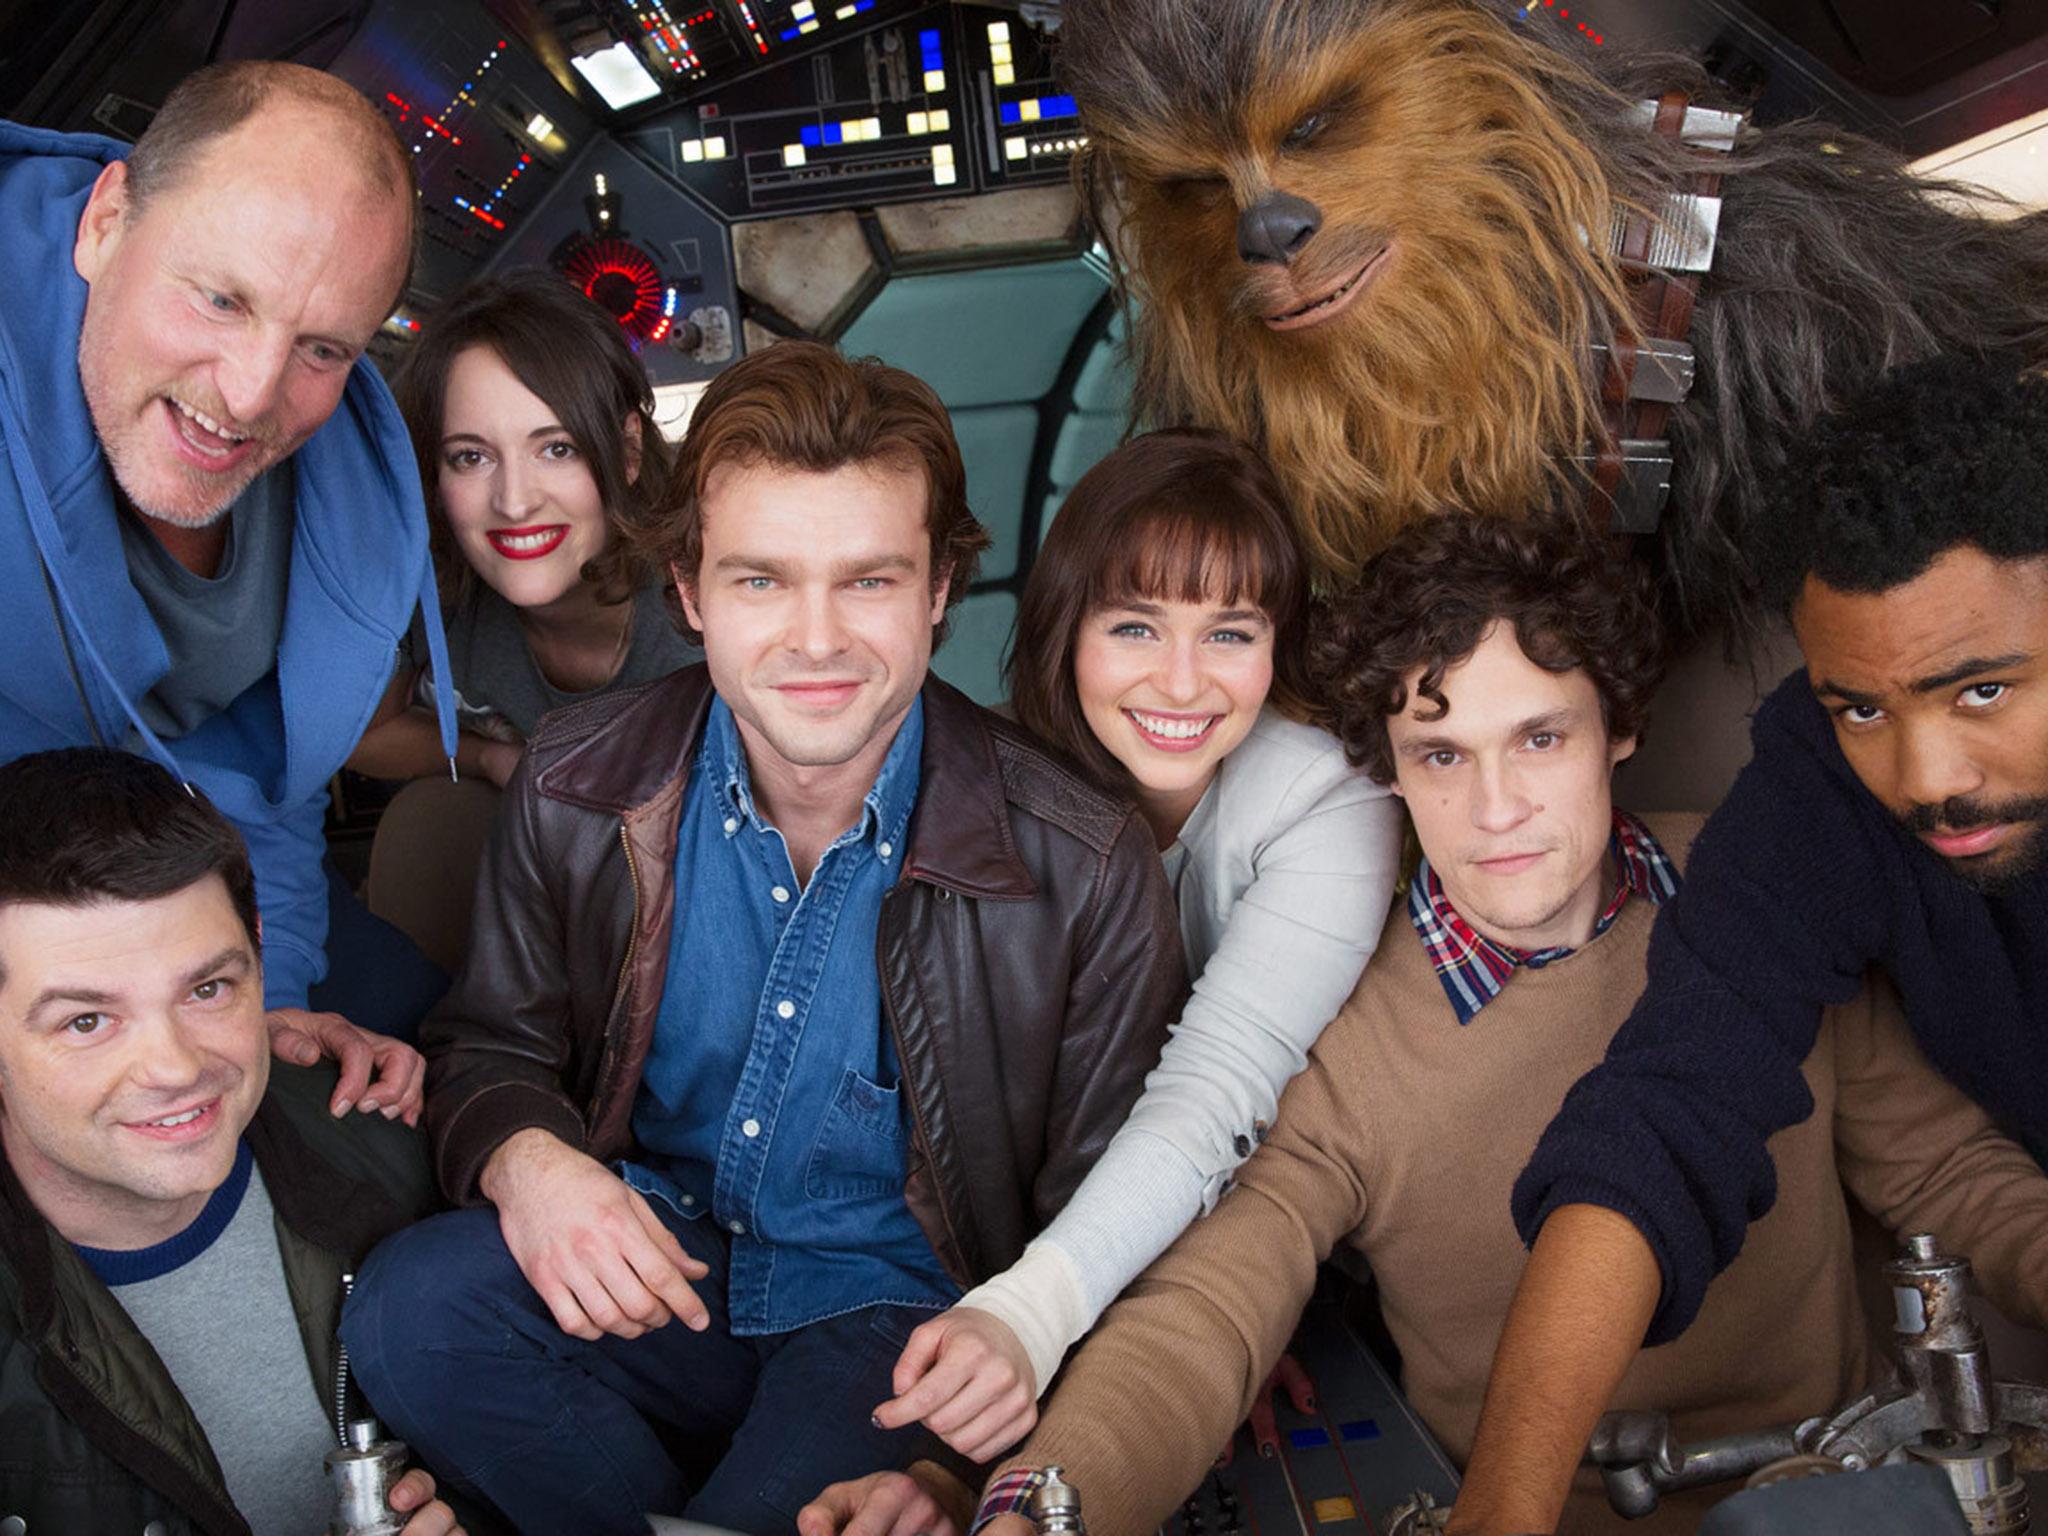 Walt Disney Studios of (left to right) director Christopher Miller, Woody Harrelson, Phoebe Waller-Bridge, Alden Ehrenreich, Emilia Clarke, Joonas Suotamo as Chewbacca, director Phil Lord and Donald Glover, on the set of the new Han Solo Star Wars spin-off as filming kicked off at London's Pinewood Studios.